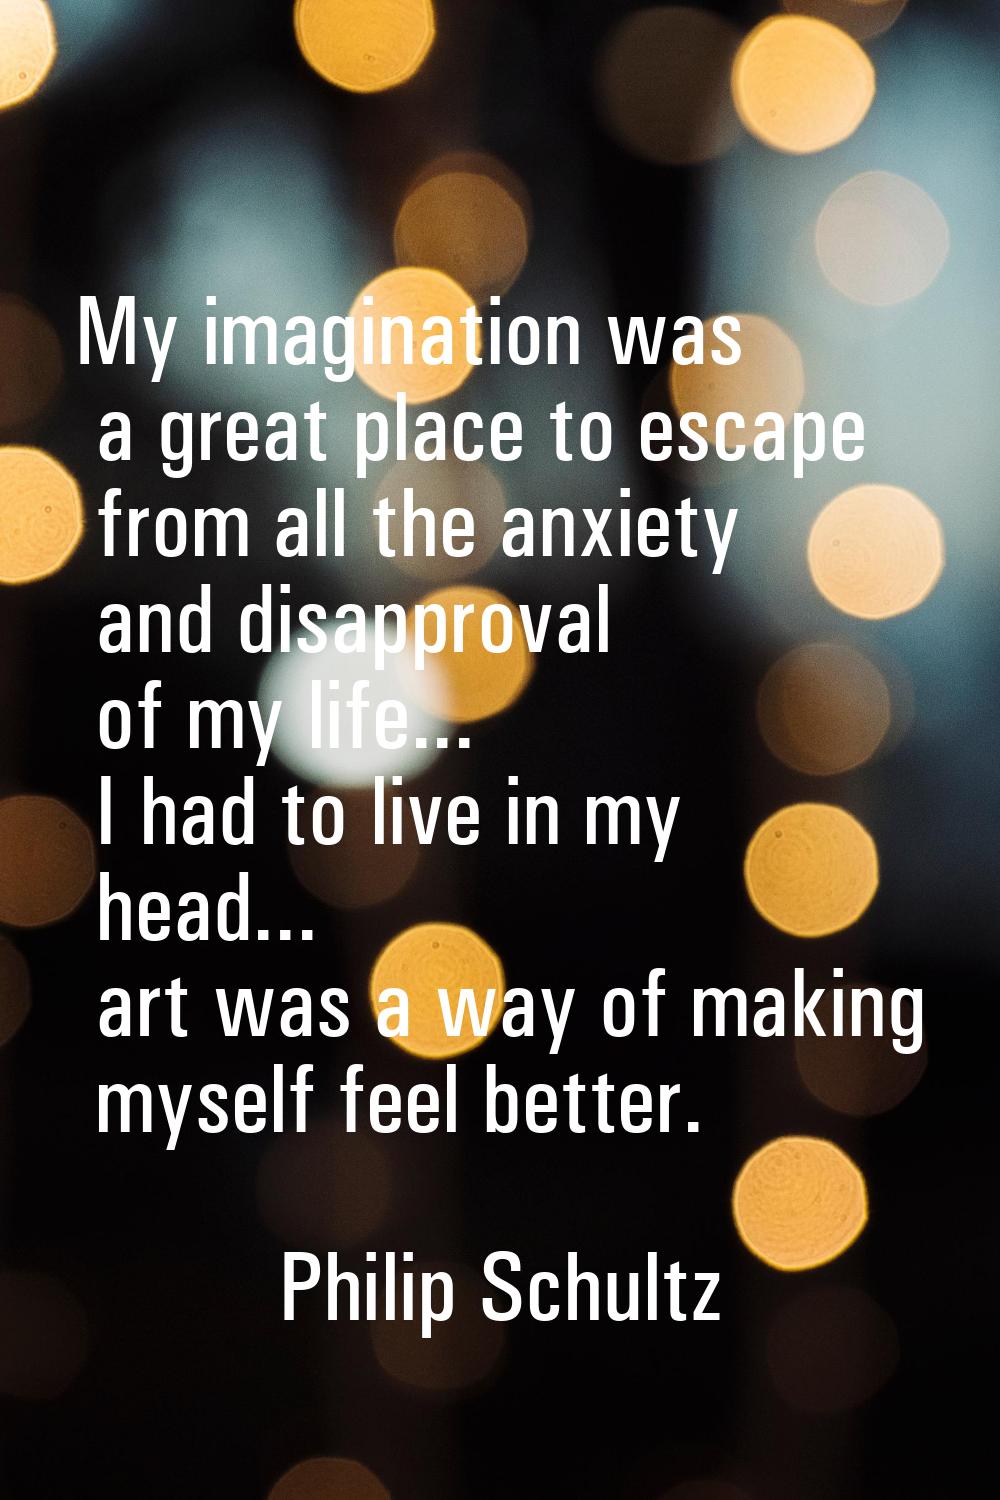 My imagination was a great place to escape from all the anxiety and disapproval of my life... I had